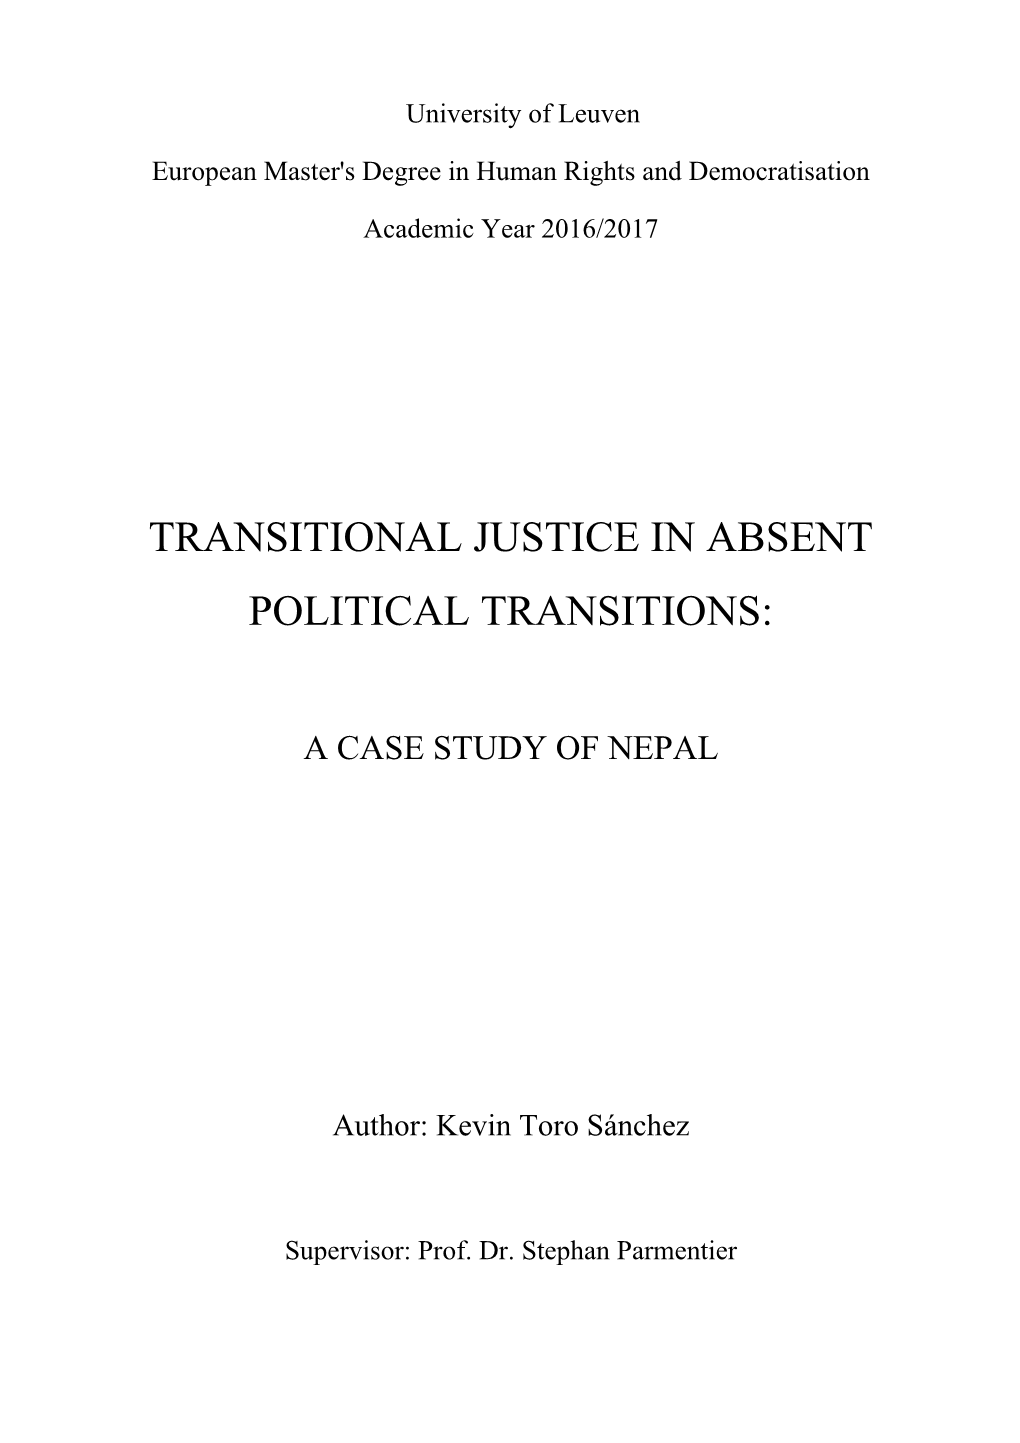 Transitional Justice in Absent Political Transitions